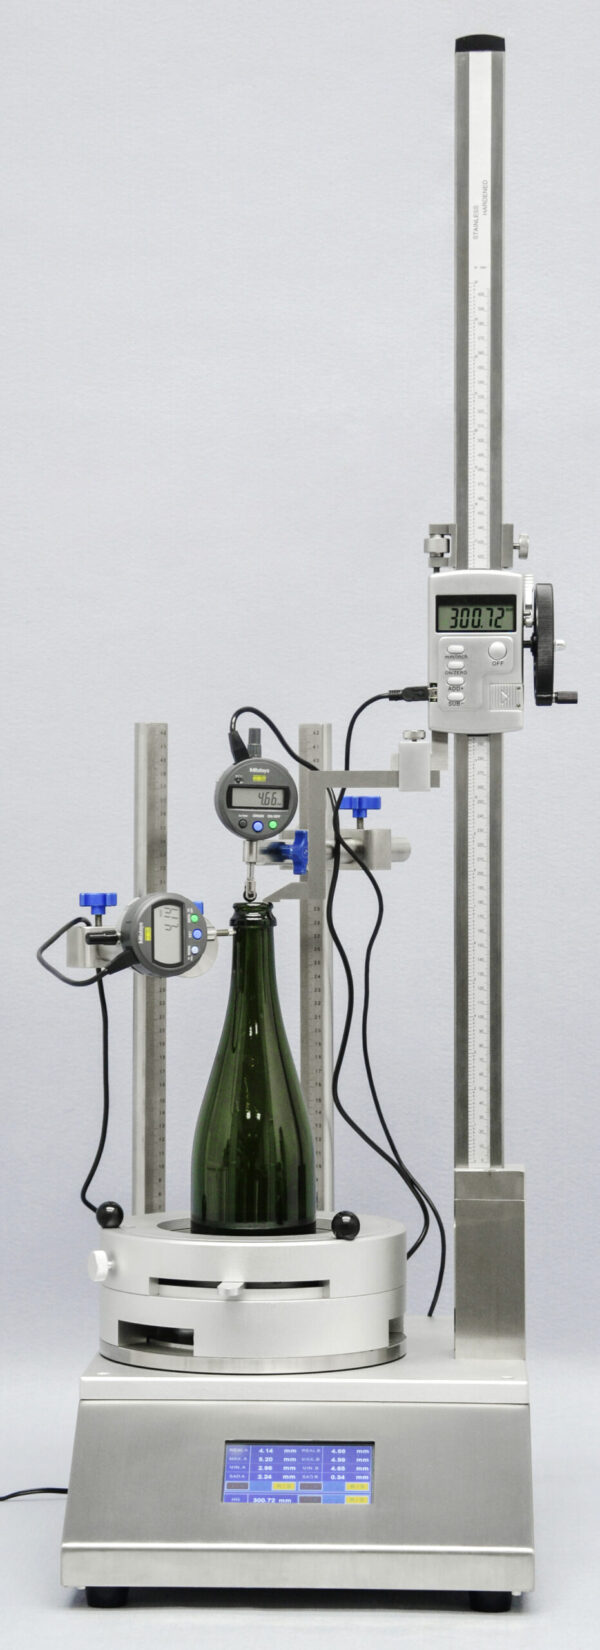 UBPT-3 Universal Bottle Perpendicularity Tester with mouth clearance and height gauges for precise measurement.